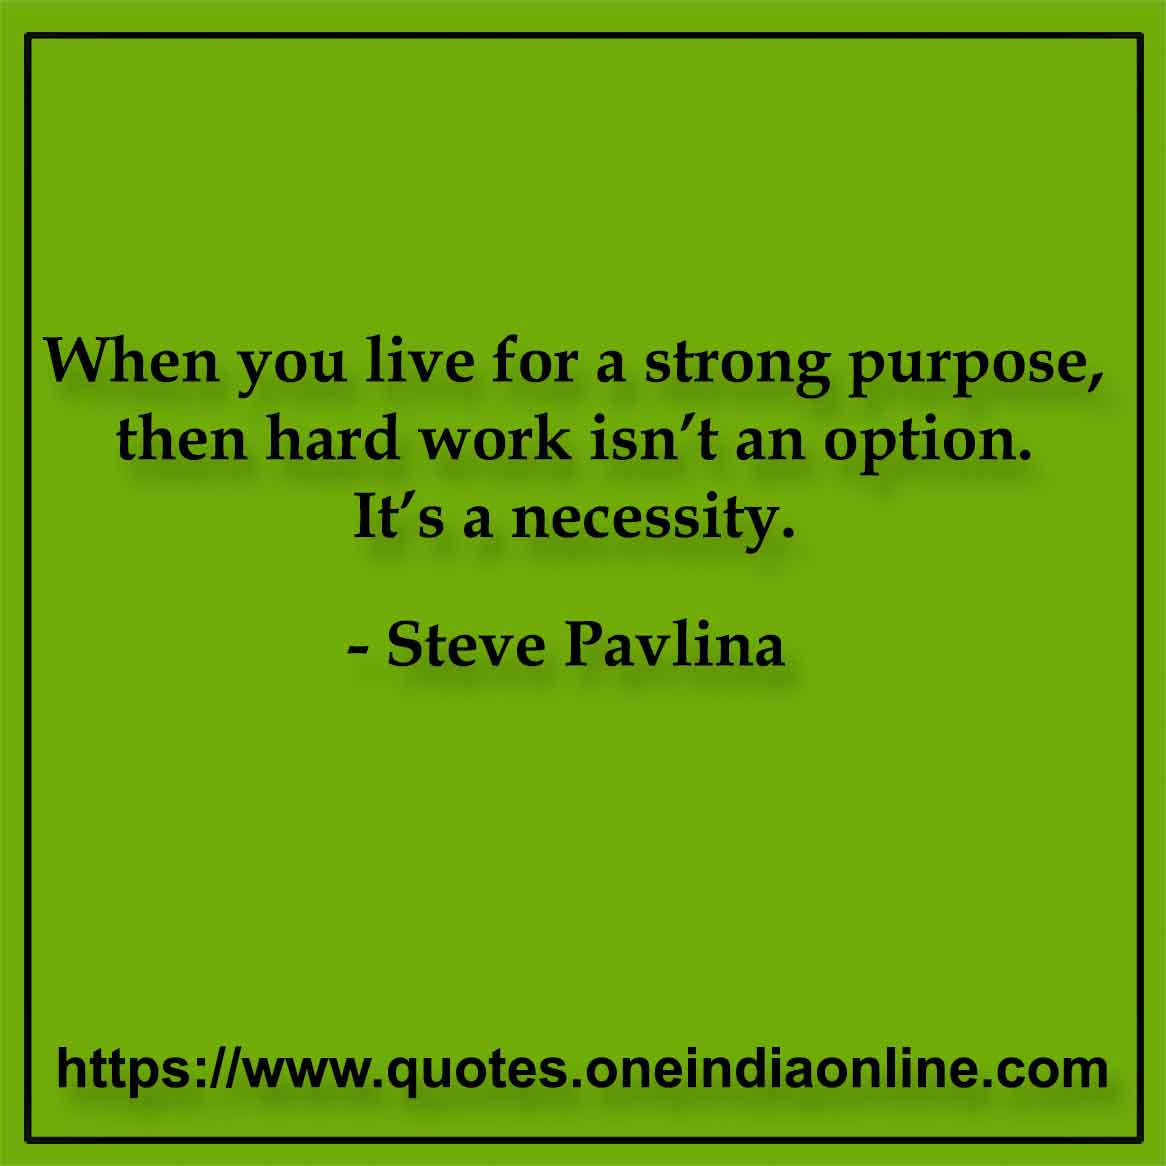 When you live for a strong purpose, then hard work isn’t an option. It’s a necessity. 

-  Steve Pavlina